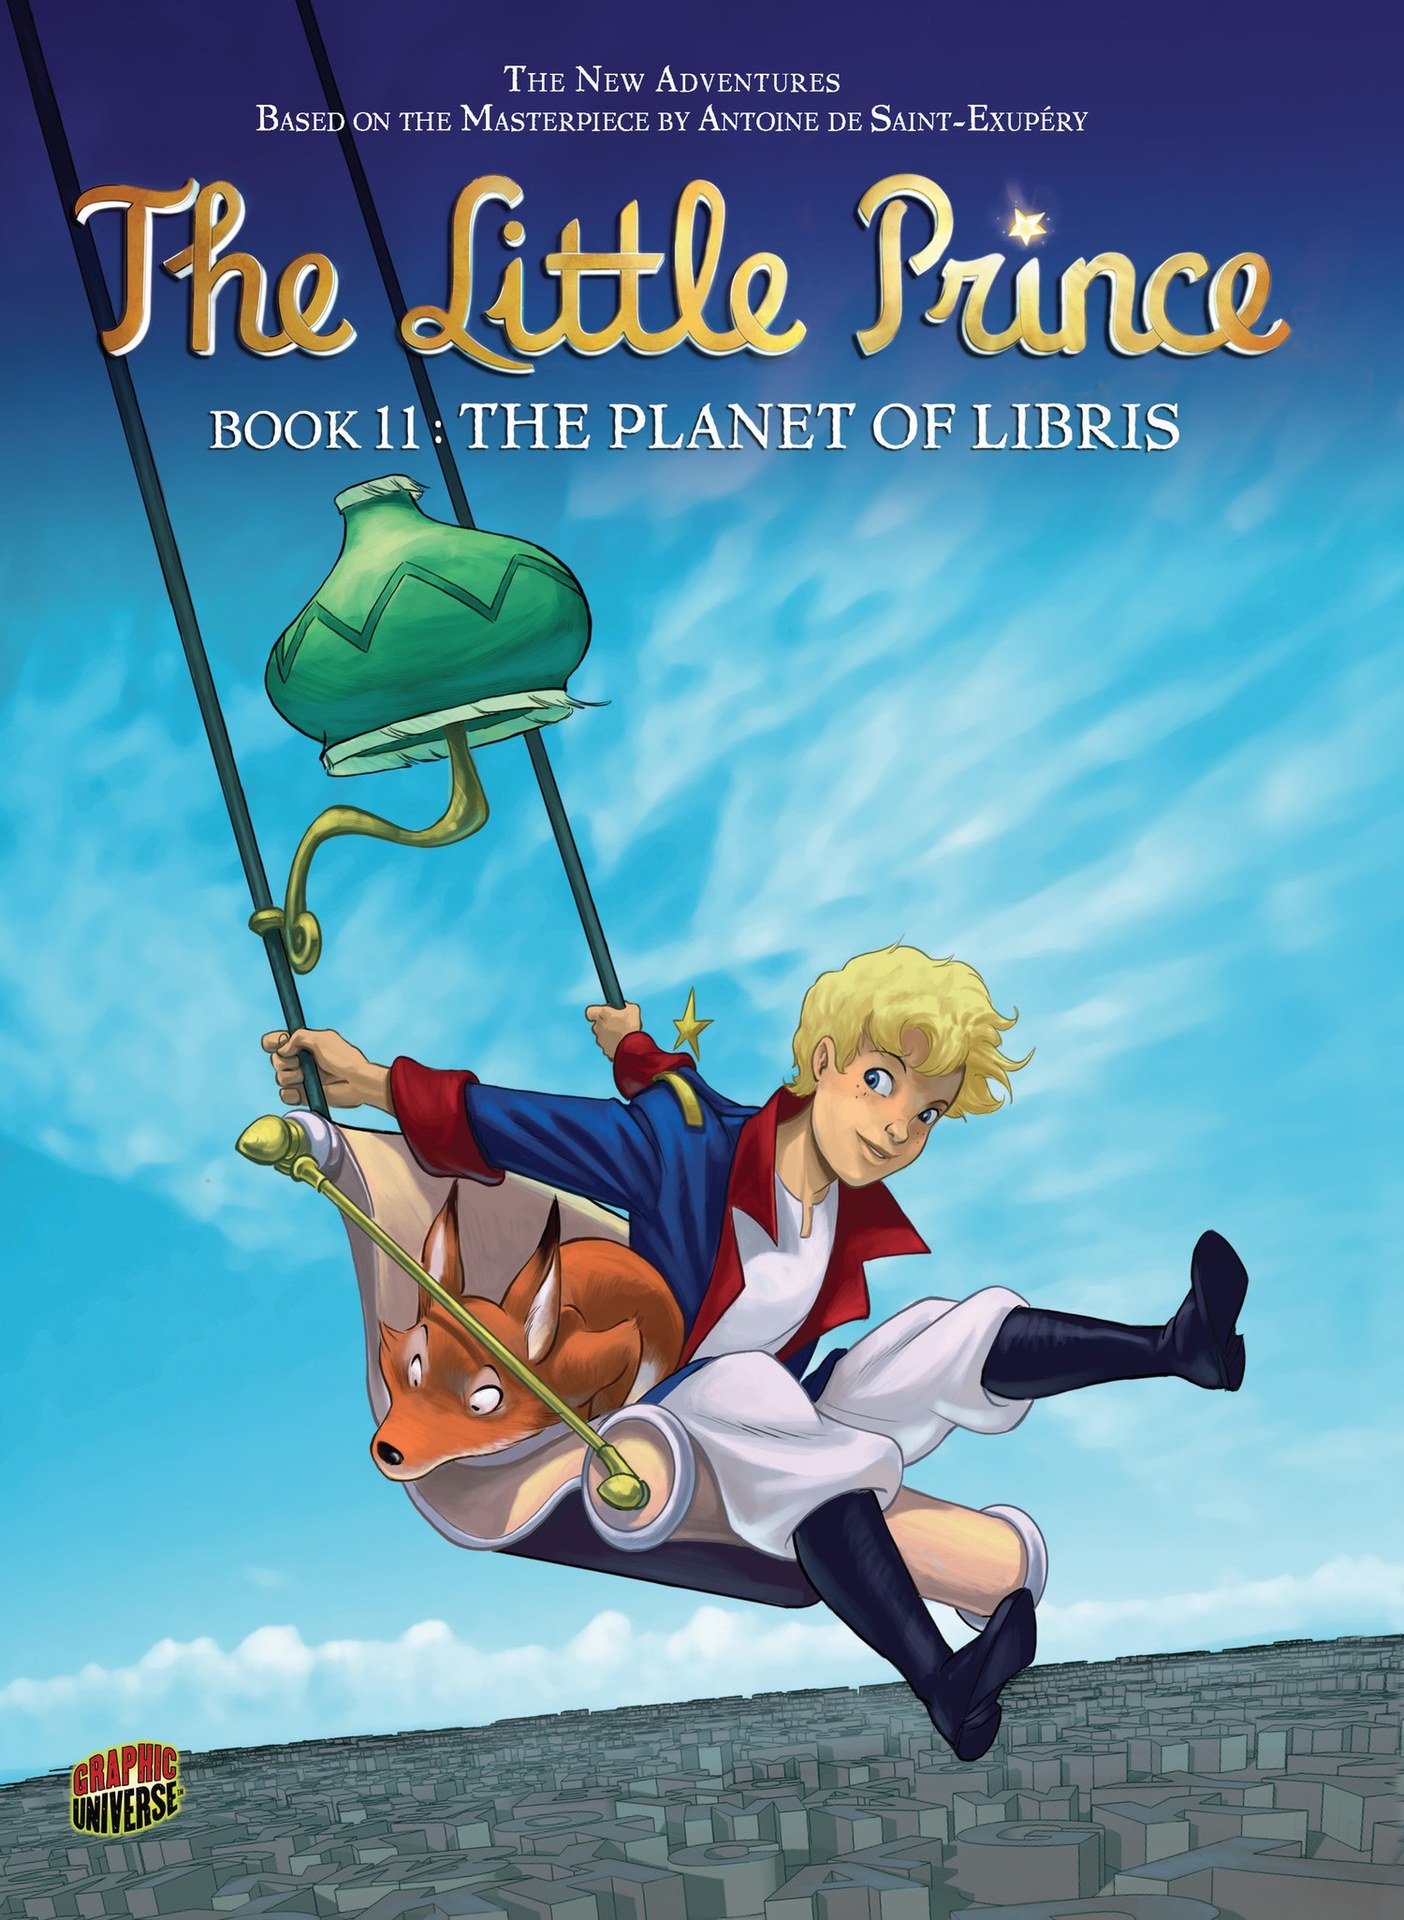 The Little Prince 11 | Read The Little Prince 11 comic online in high  quality. Read Full Comic online for free - Read comics online in high  quality .|viewcomiconline.com